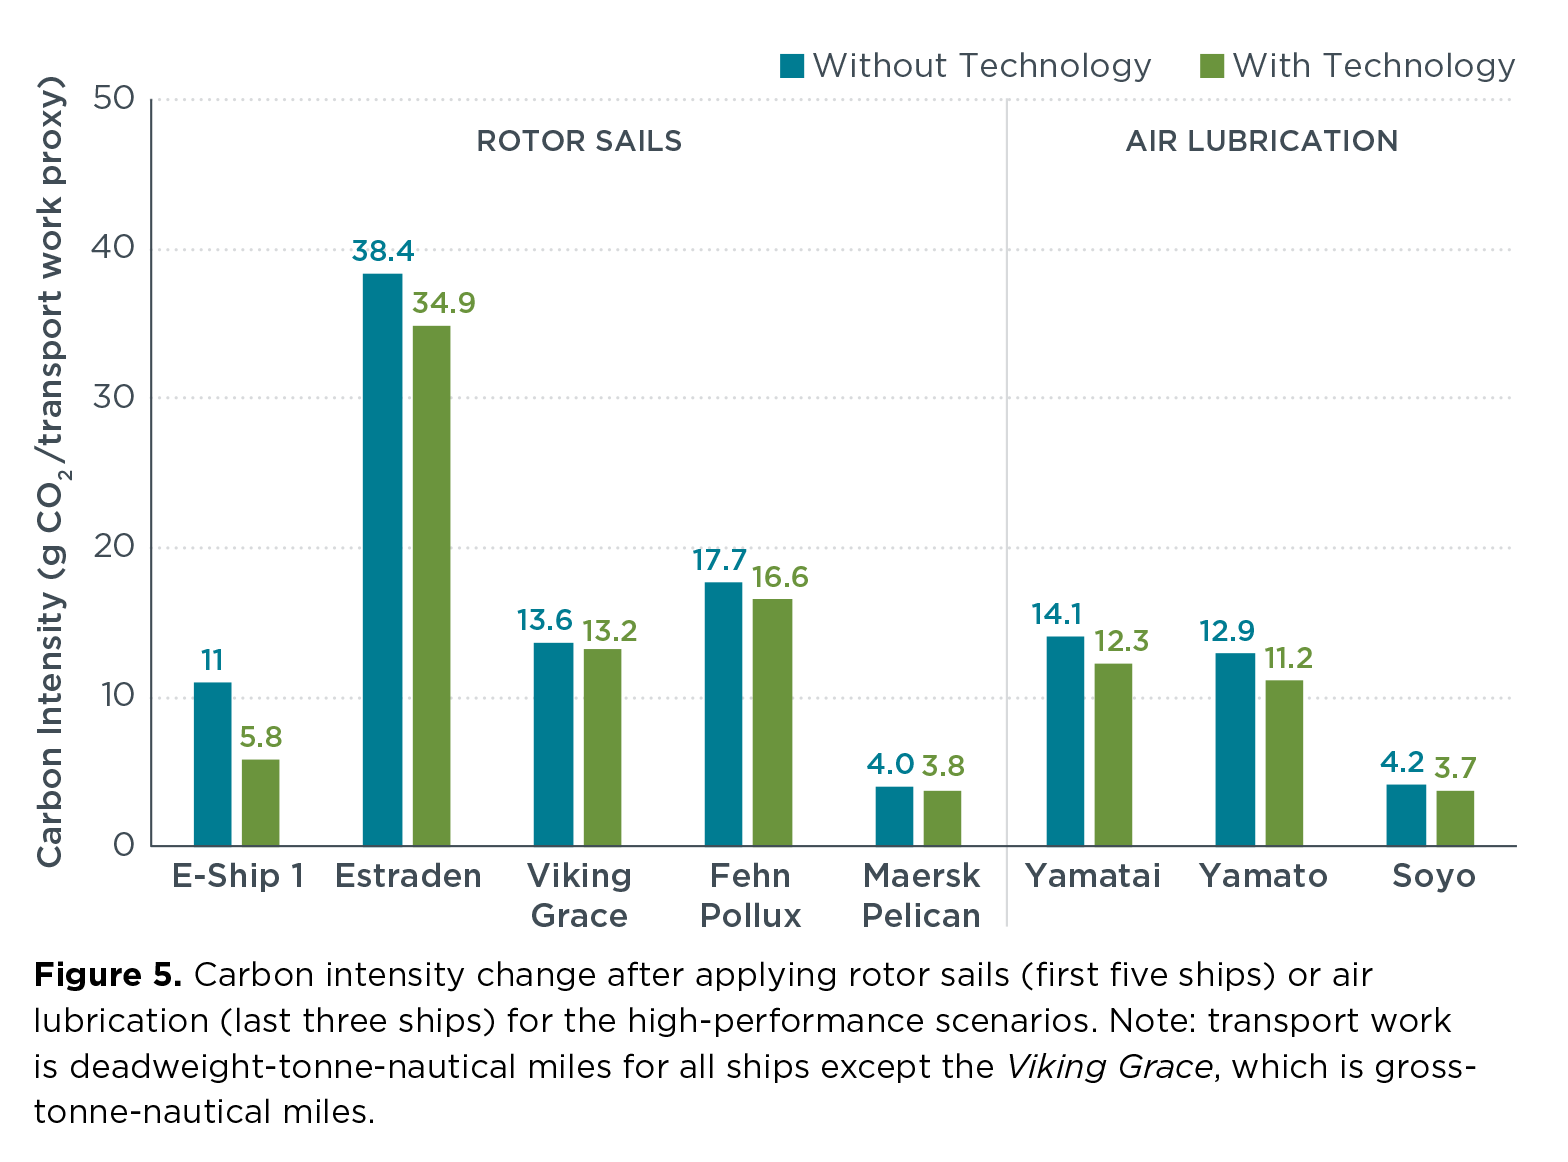 chart showing carbon intensity change, rotor sails and hull air lubrication